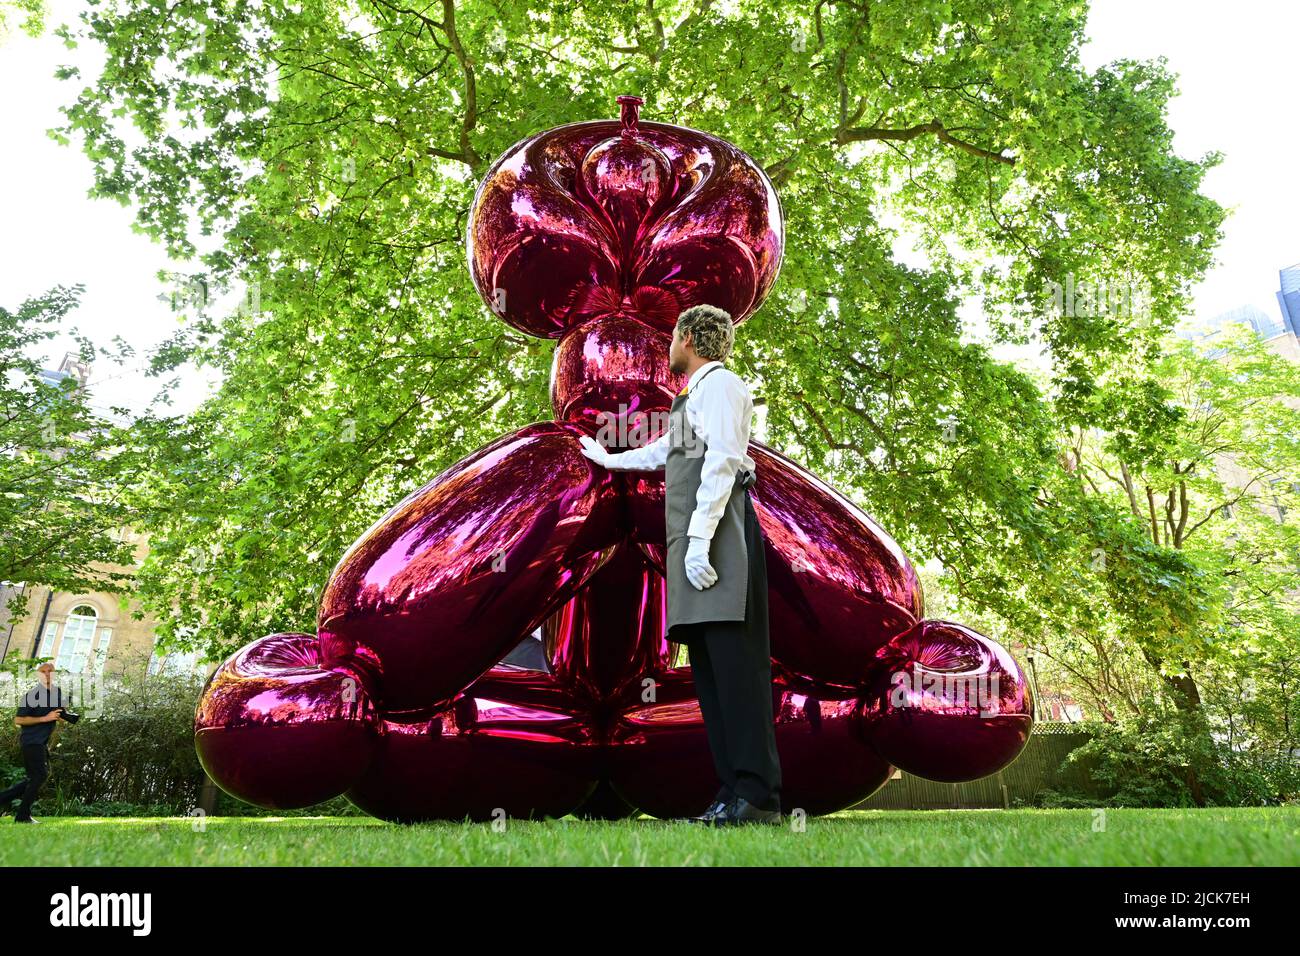 St James’s Square, London, UK. 14 June 2022. Christie’s 20/21 London to Paris unveil Jeff Koons sculpture, Balloon Monkey (Magenta) (2006-13), estimate: £6,000,000-10,000,000. Presented by Victor and Olena Pinchuk the sale will raise funds for Humanitarian Aid for Ukraine Credit: Malcolm Park/Alamy Live News Stock Photo